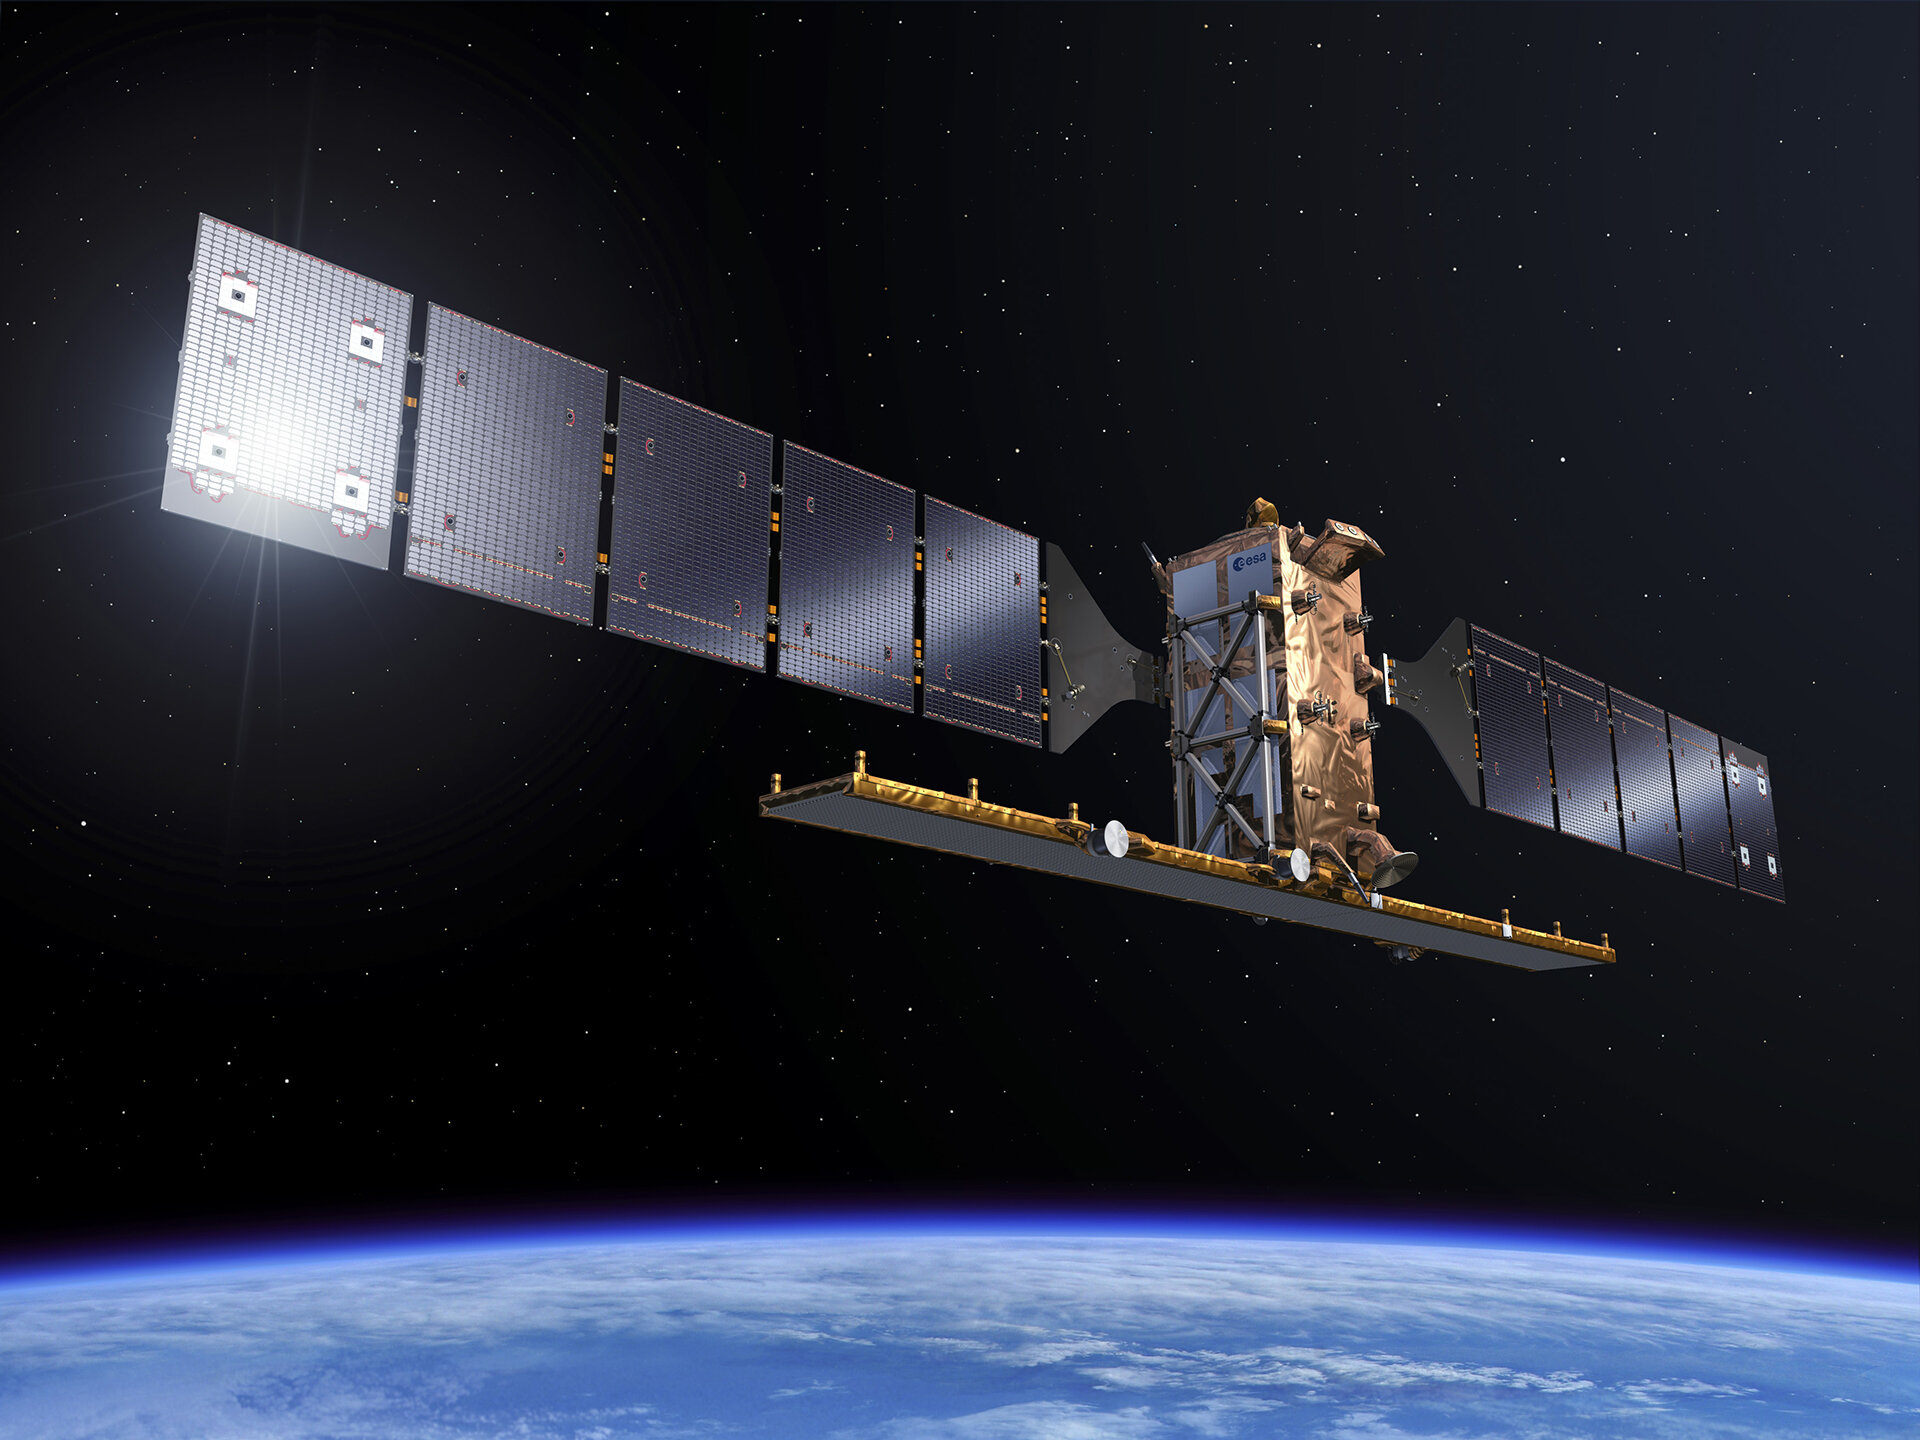 ESA satellites help us to monitor our ever-changing planet